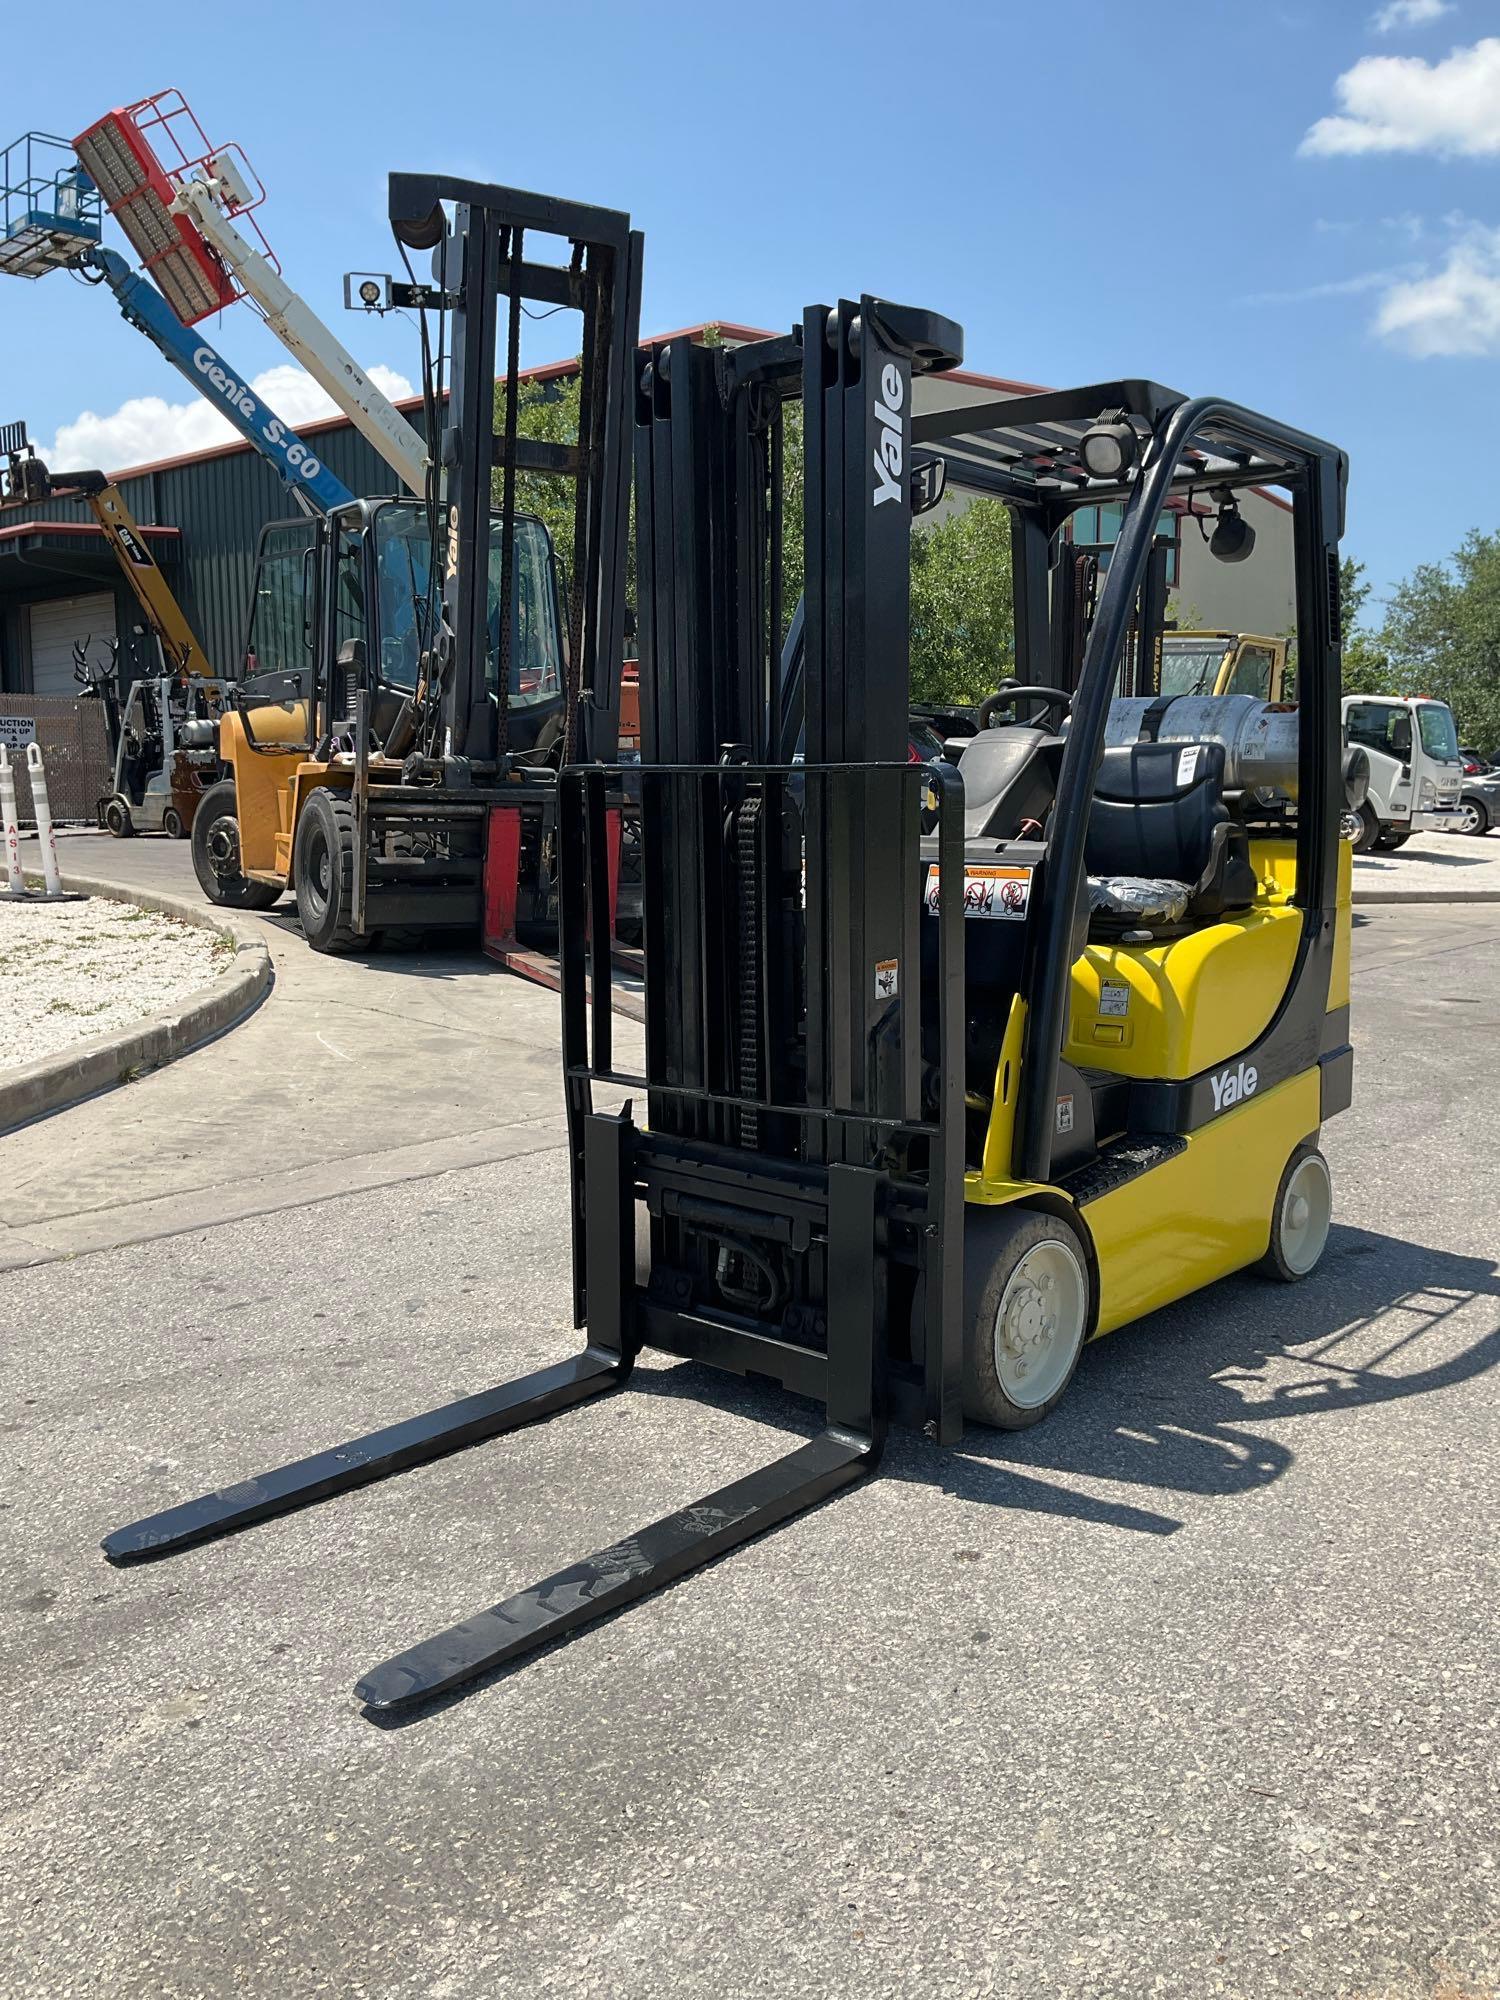 YALE FORKLIFT MODEL GLC040SVXNUSE082, LP POWERED, APPROX MAX CAPACITY 3750LBS, MAX HEIGHT 187?, T...